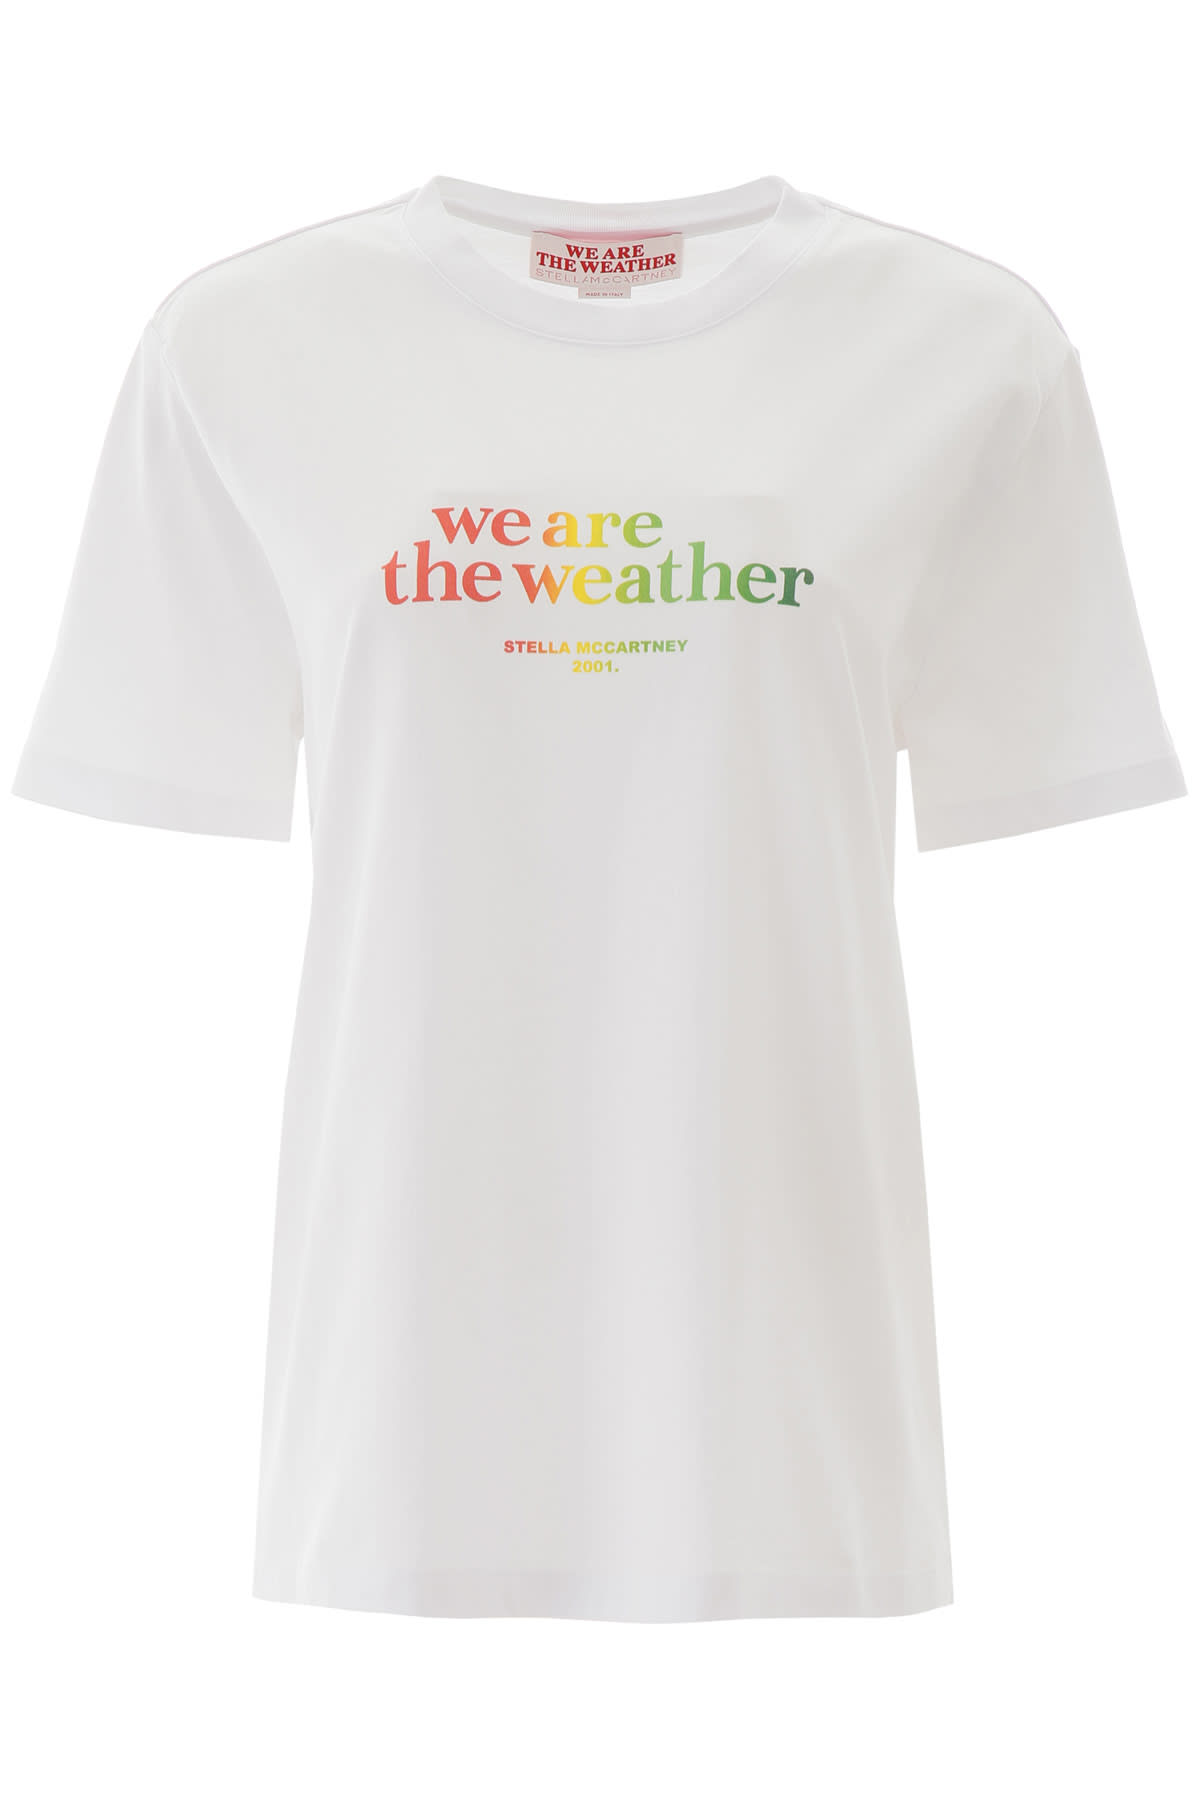 STELLA MCCARTNEY WE ARE THE WEATHER T-SHIRT,11251031